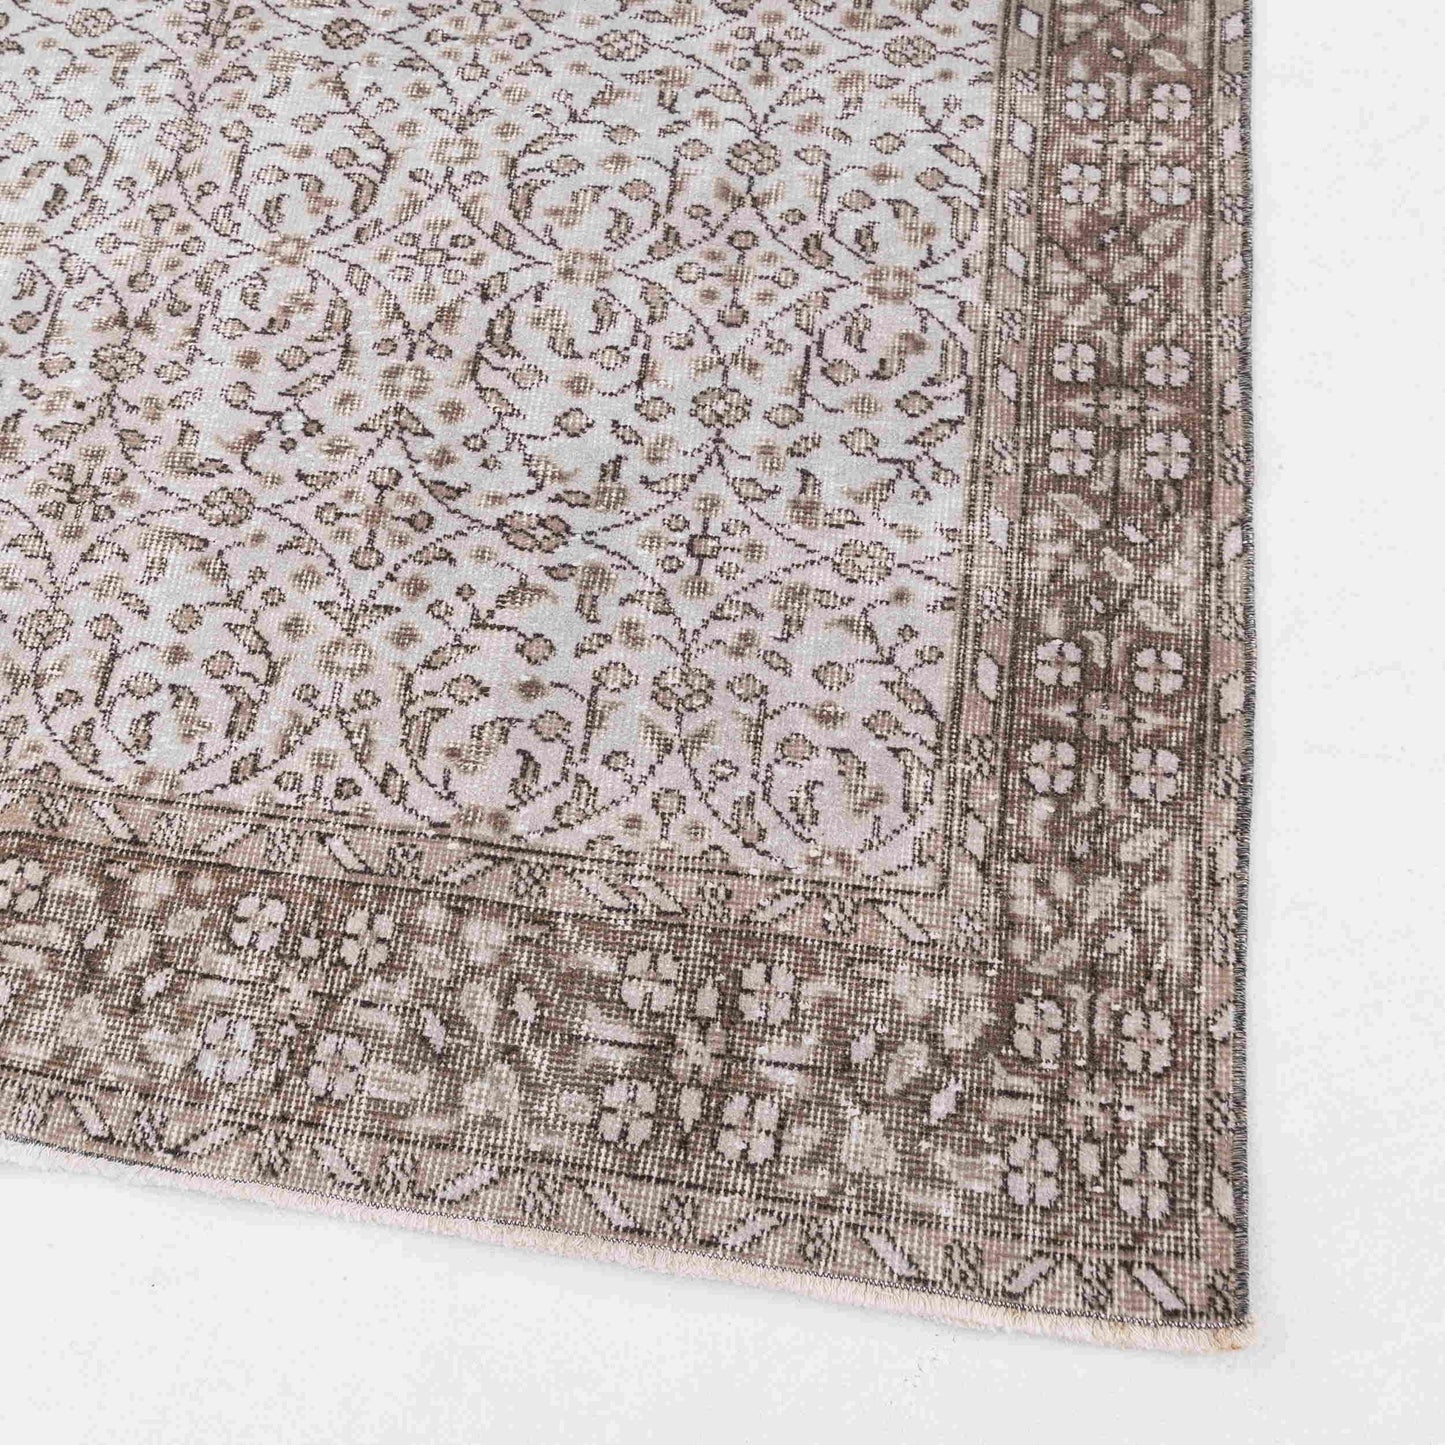 Oriental Rug Vintage Hand Knotted Wool On Cotton 163 x 252 Cm - 5' 5'' x 8' 4'' Sand C007 ER12